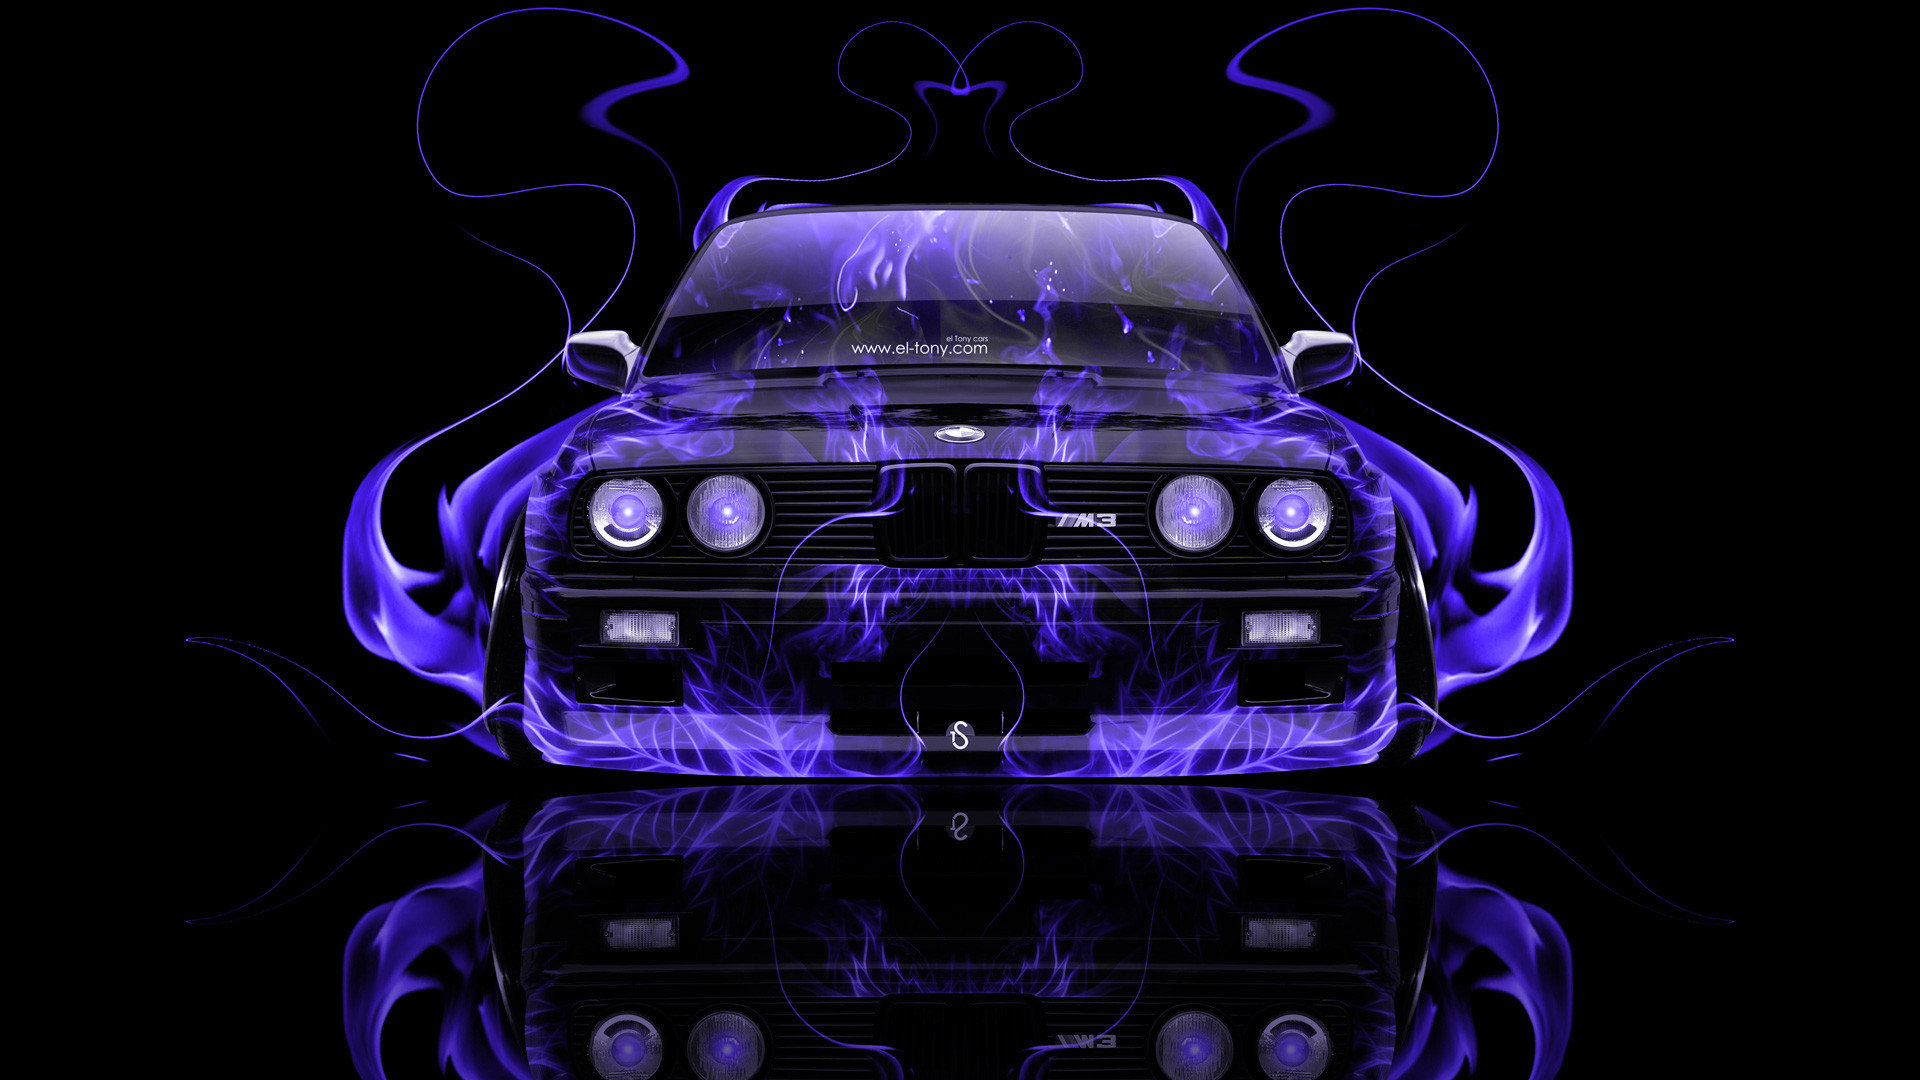 1920x1080 BMW-M3-E30-Front-Violet-Fire-Abstract-Car-2014-HD-Wallpapers-Design-By